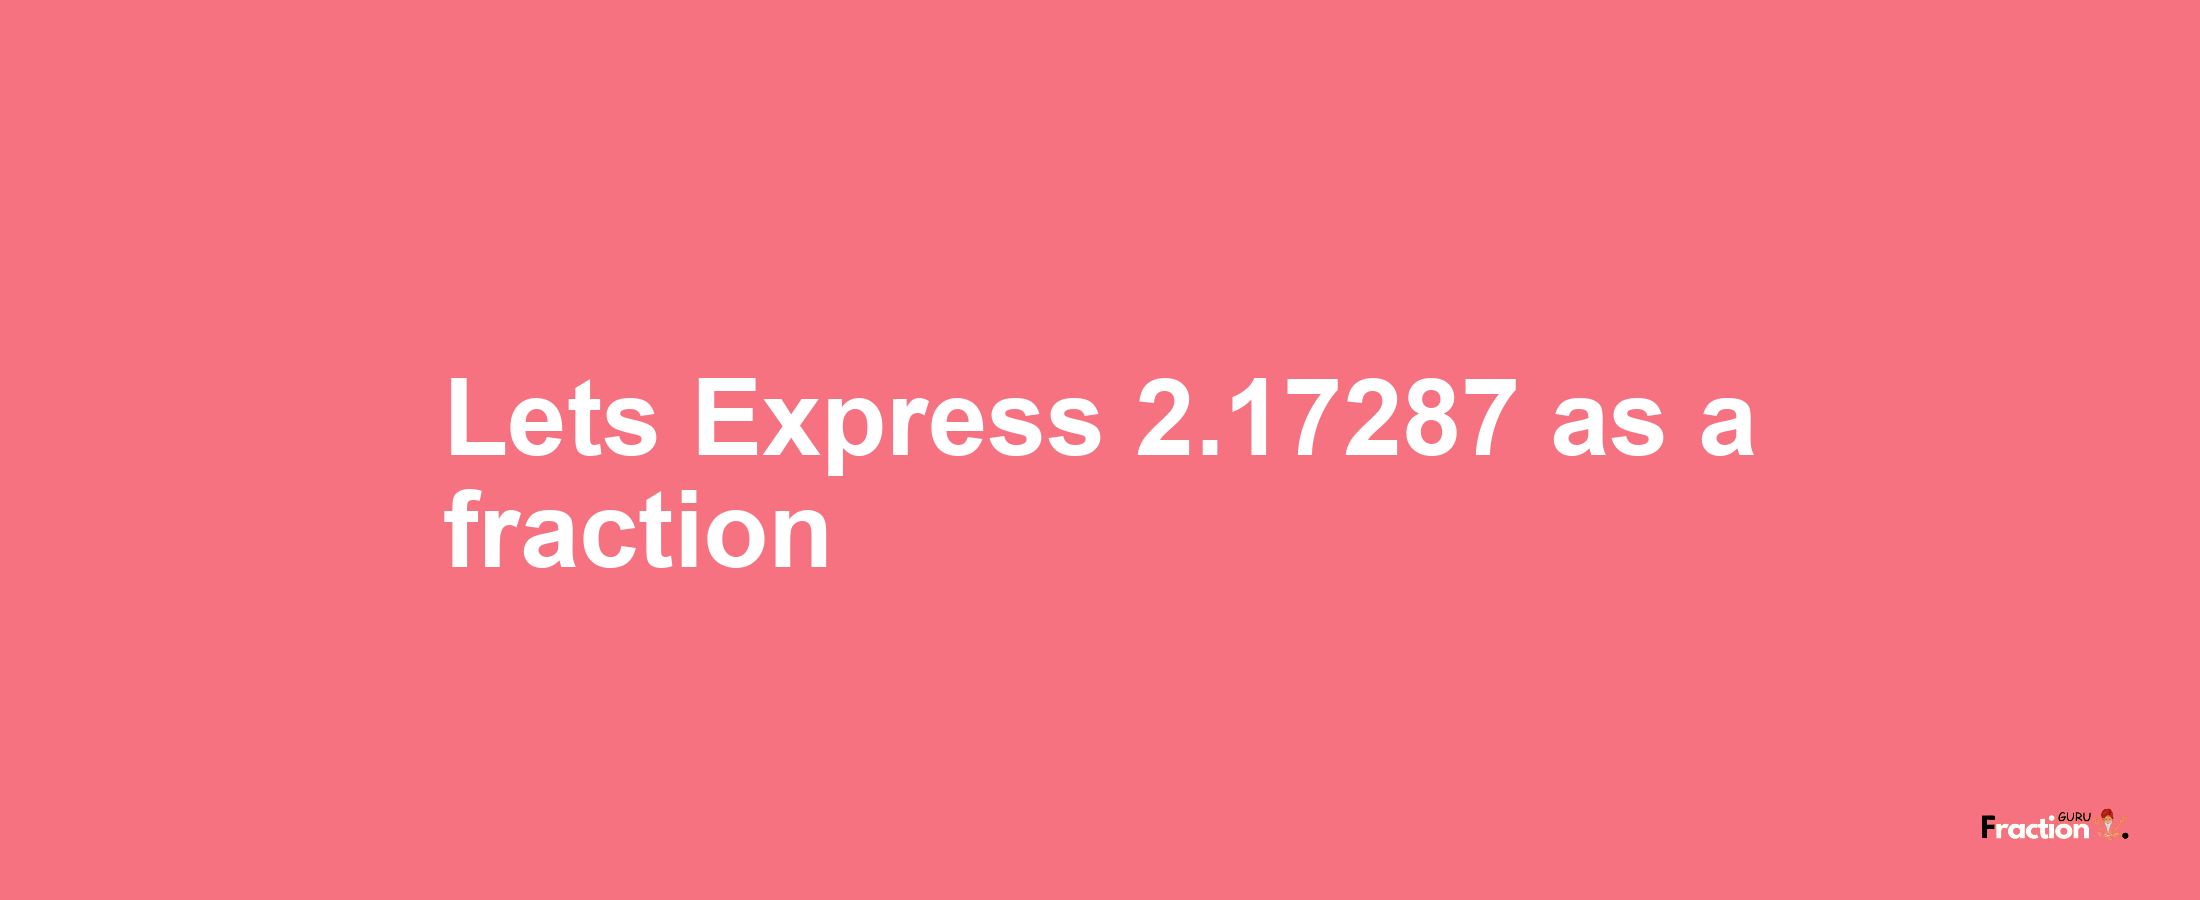 Lets Express 2.17287 as afraction